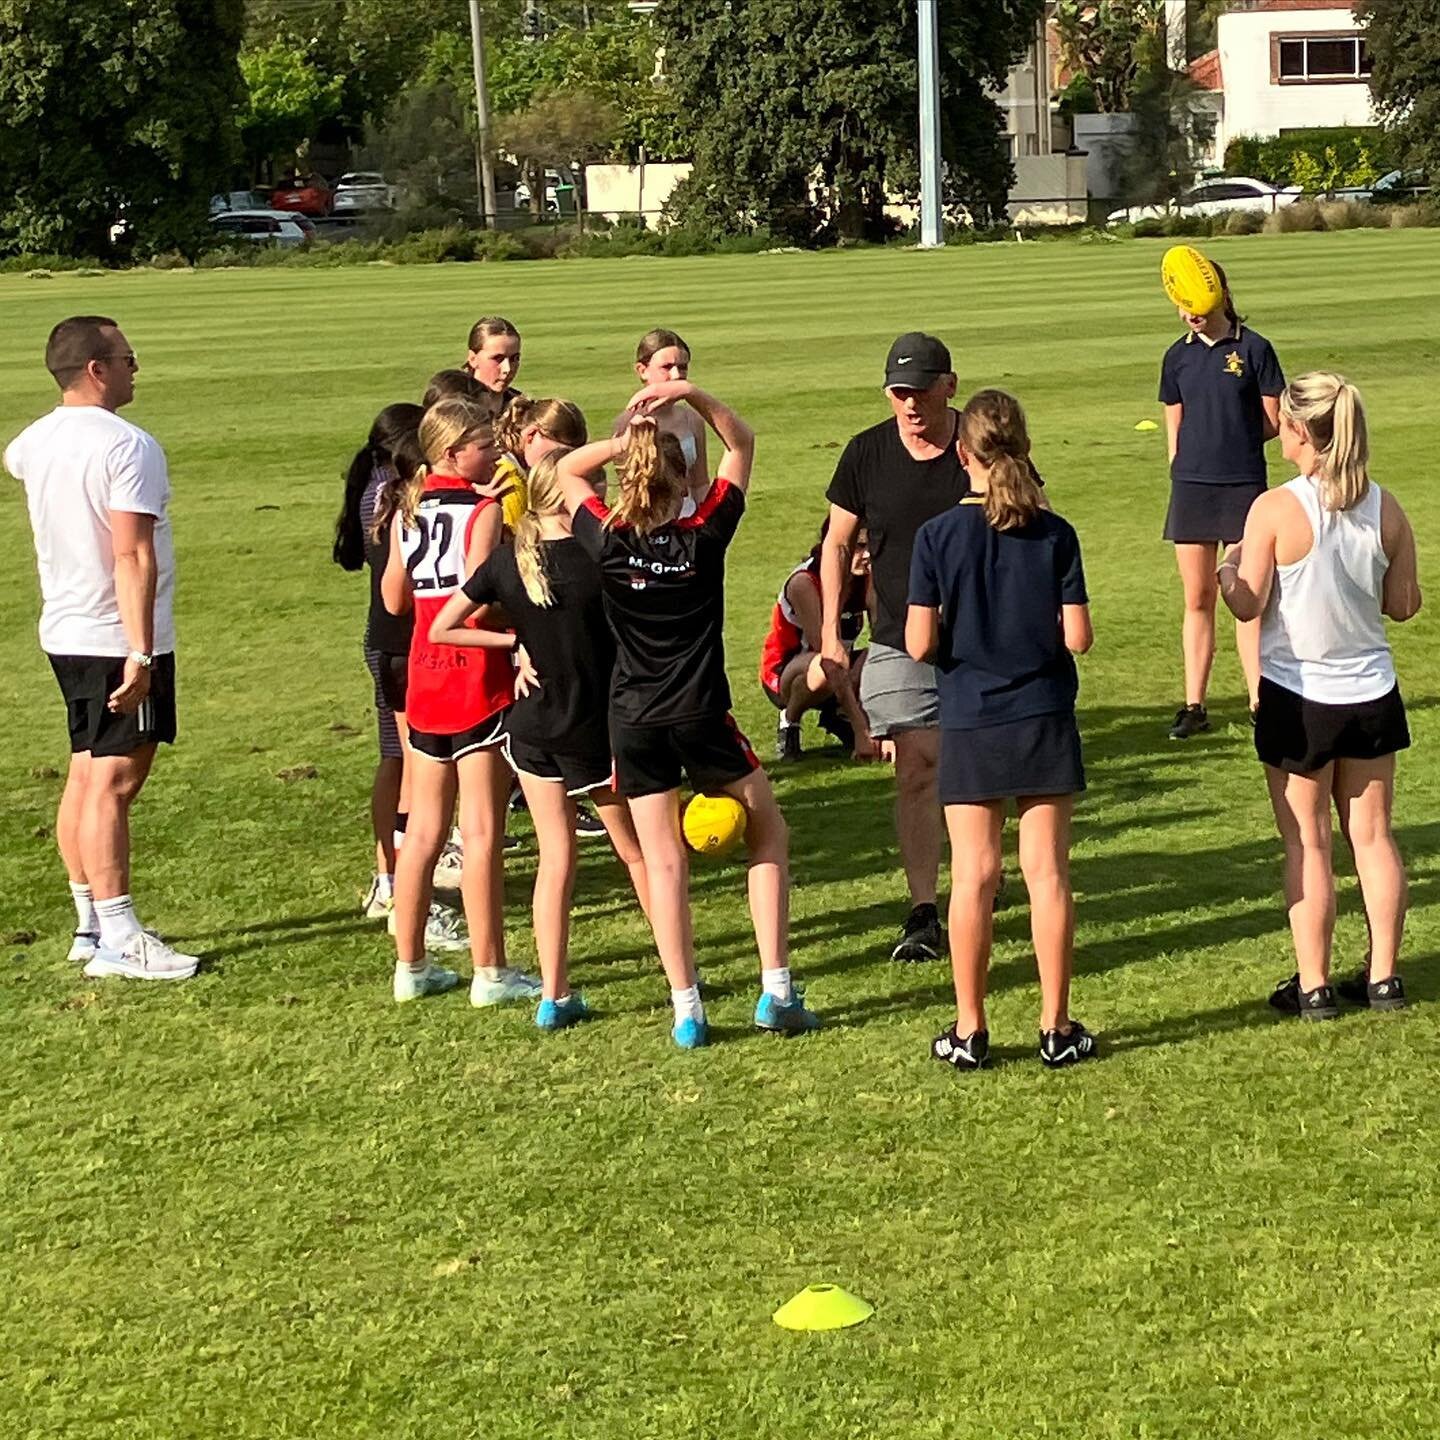 Pre-season training starting at Wattie Watson tonight for the Under 12 Girls (previously Marshall, now French). 💪 The early bird marks the footy 🤩